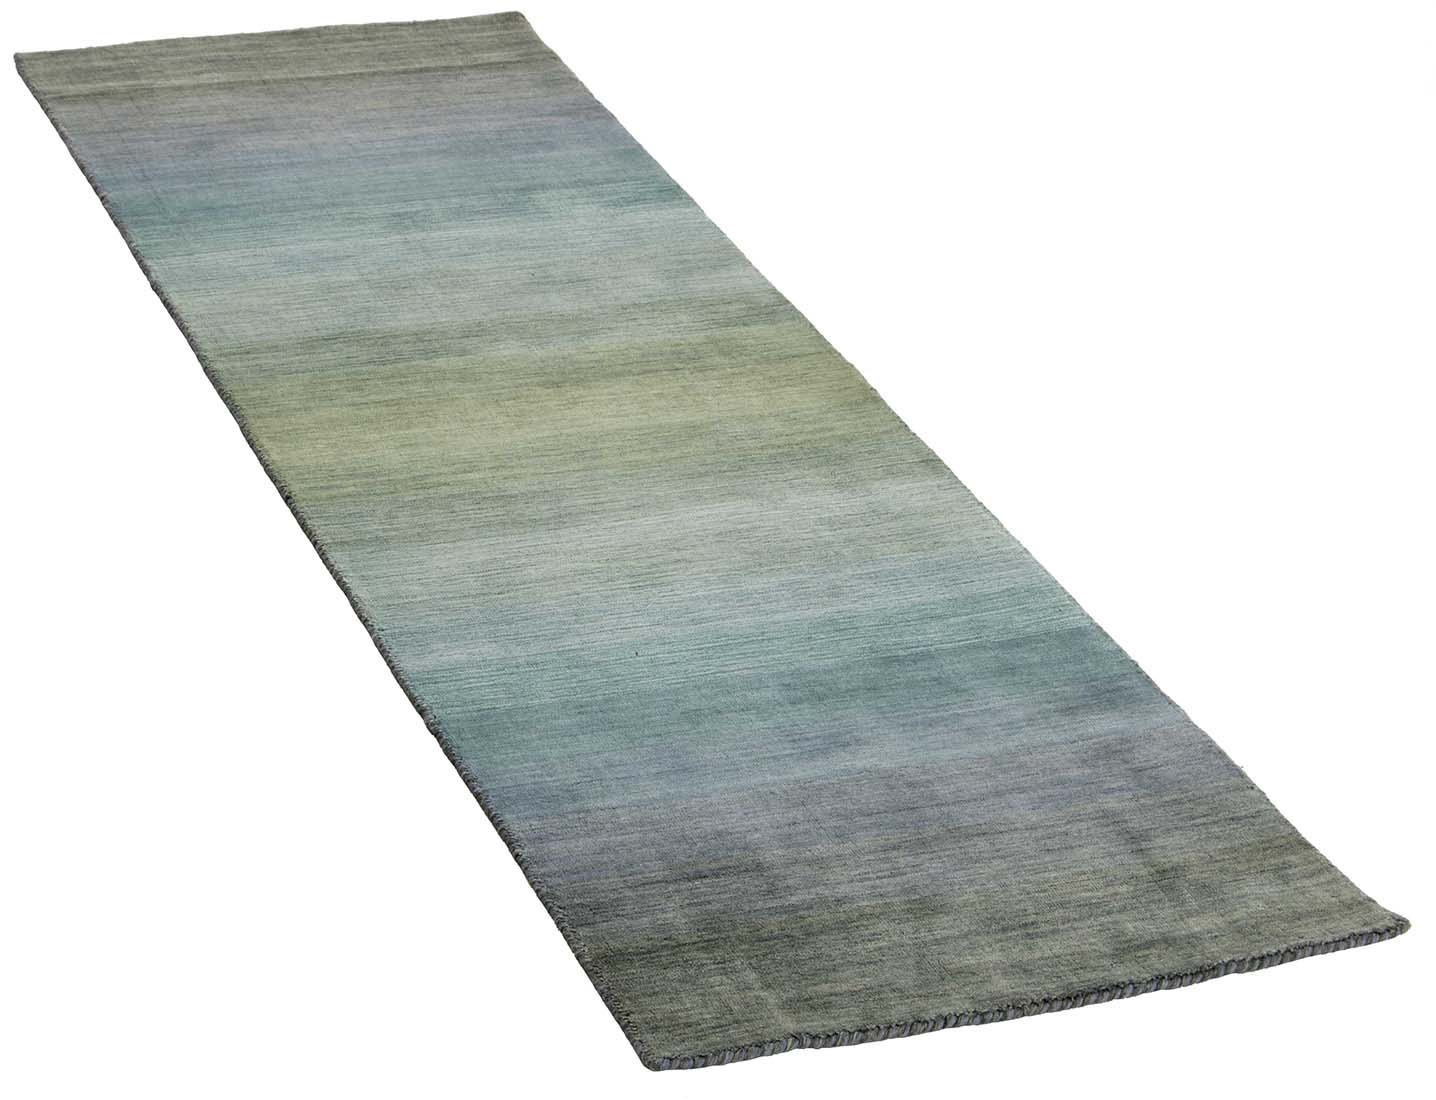  green and purple ombre runner
